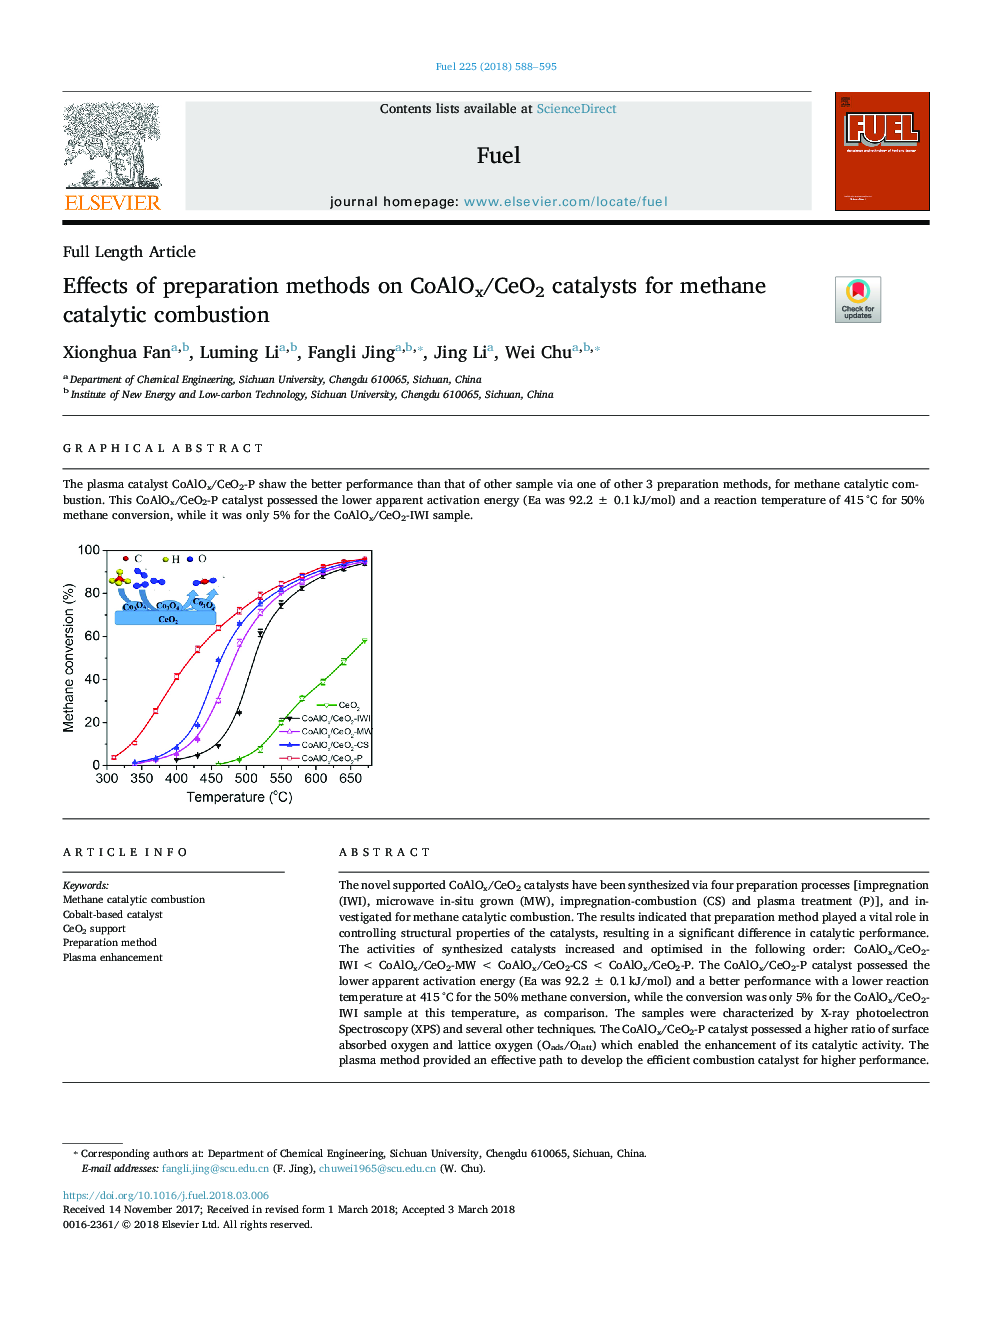 Effects of preparation methods on CoAlOx/CeO2 catalysts for methane catalytic combustion